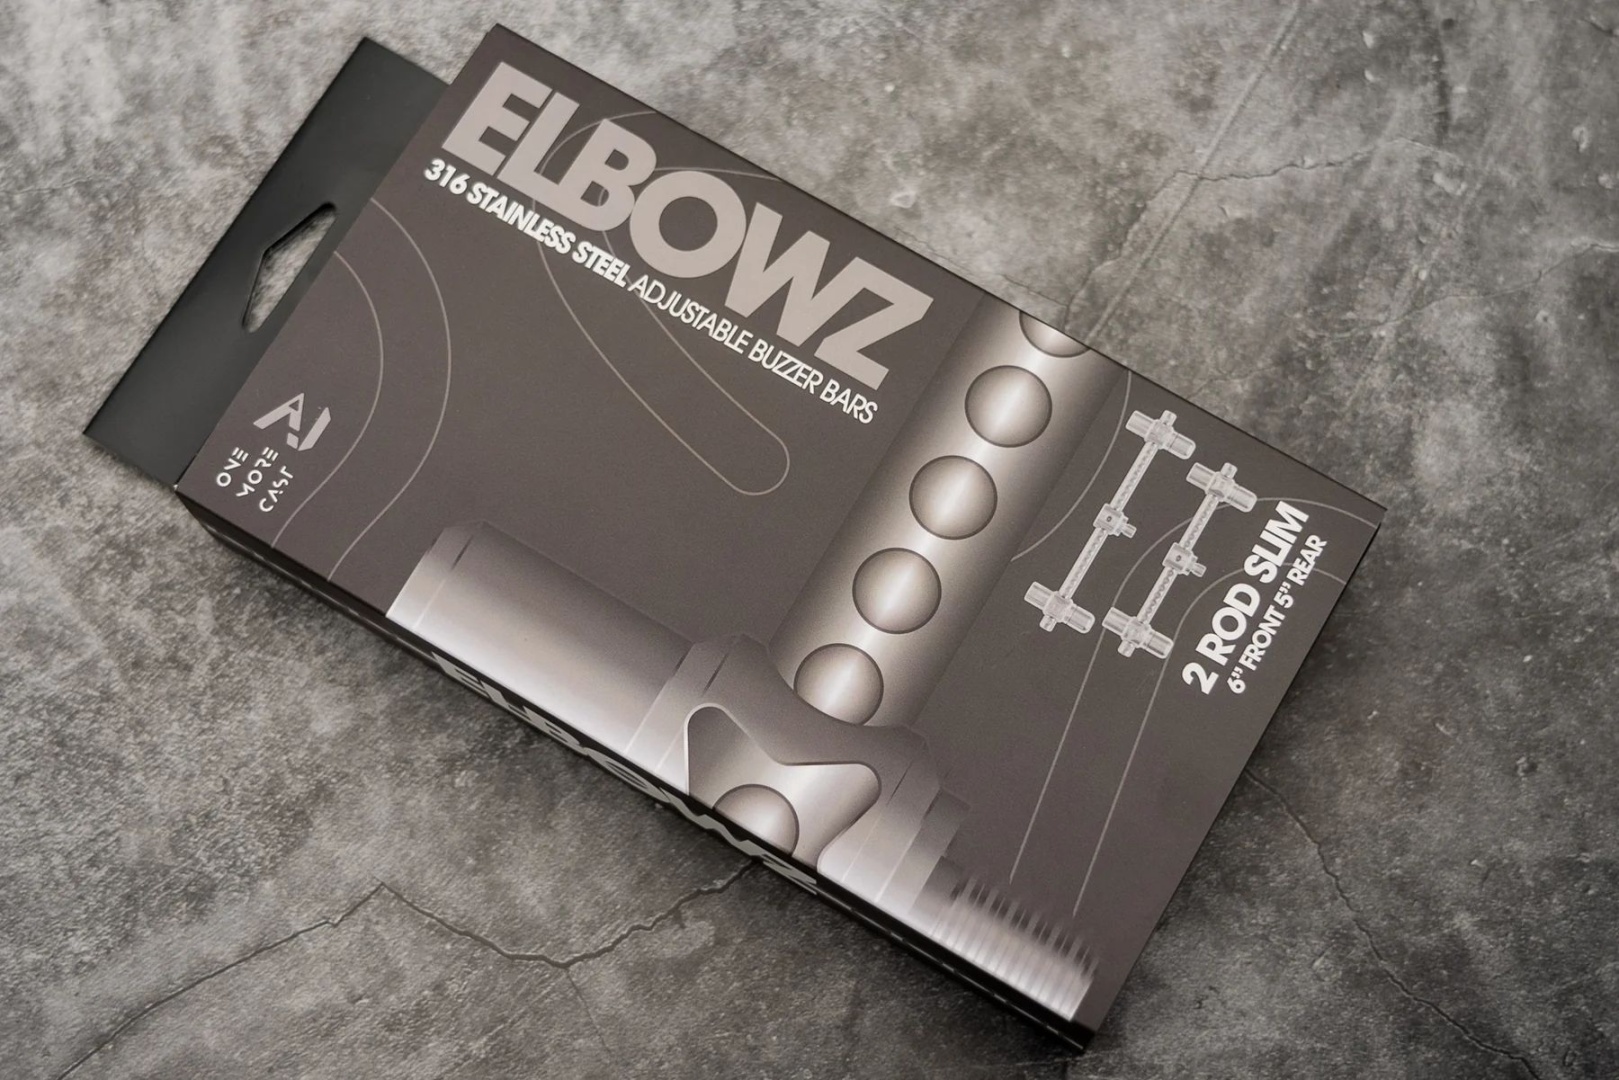 One More Cast Elbowz High-Grade 316 Stainless Steel 2 Rod Buzzbars 